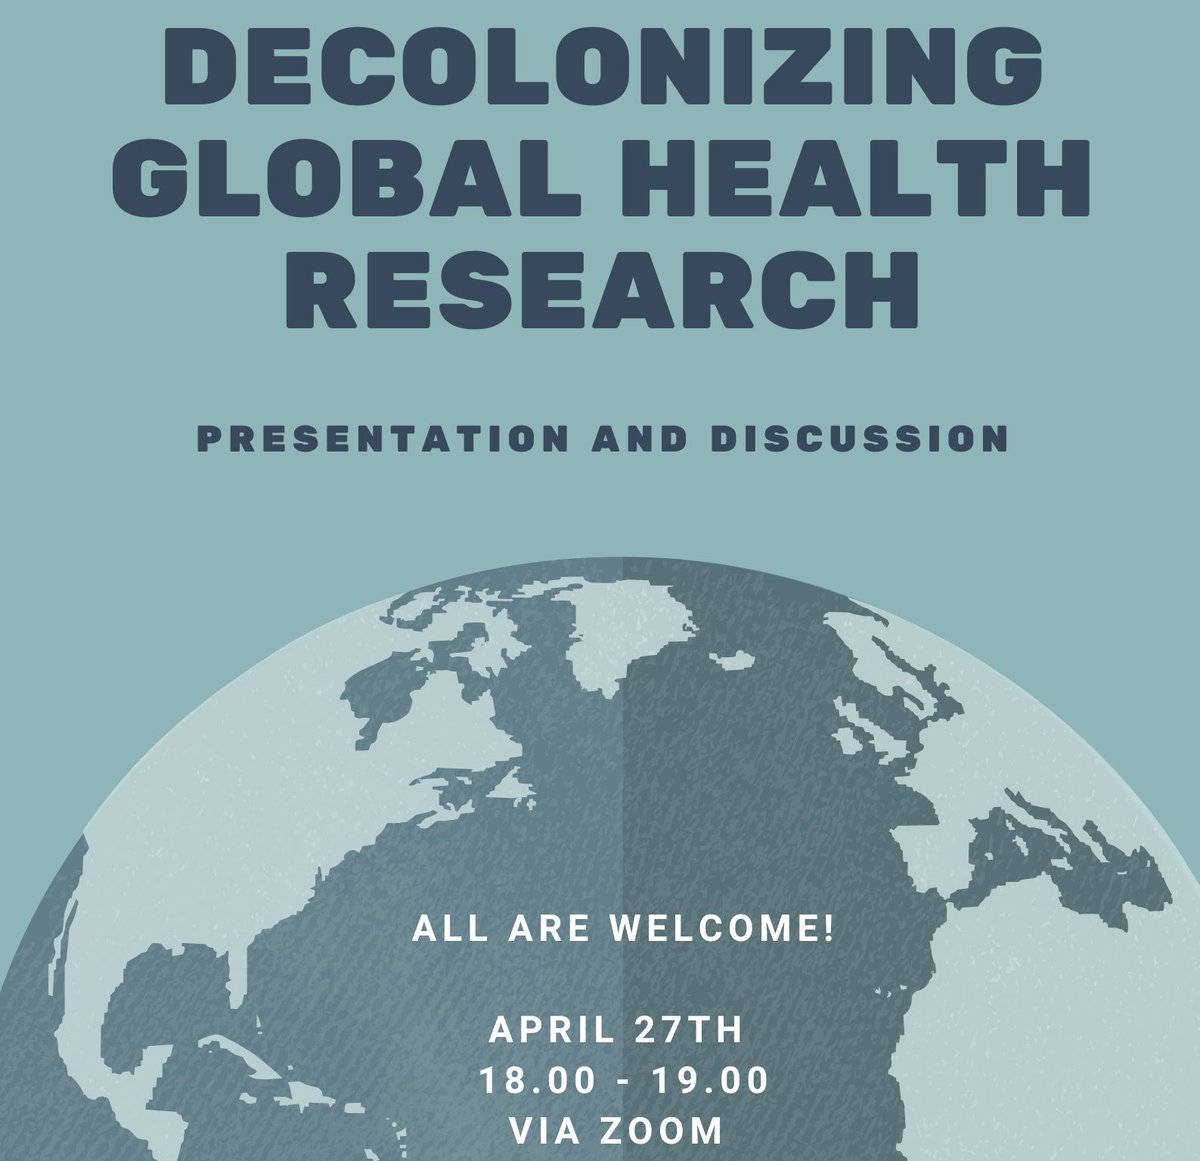 Join our presentation and discussion to learn from researchers and students! 🌏 With Dr. Alyshia Gálvez, a medical and cultural anthropologist, and Dr. Jeremy Youde, a researcher in Global Health Politics, along with Master's students. eventbrite.se/e/decolonizing…